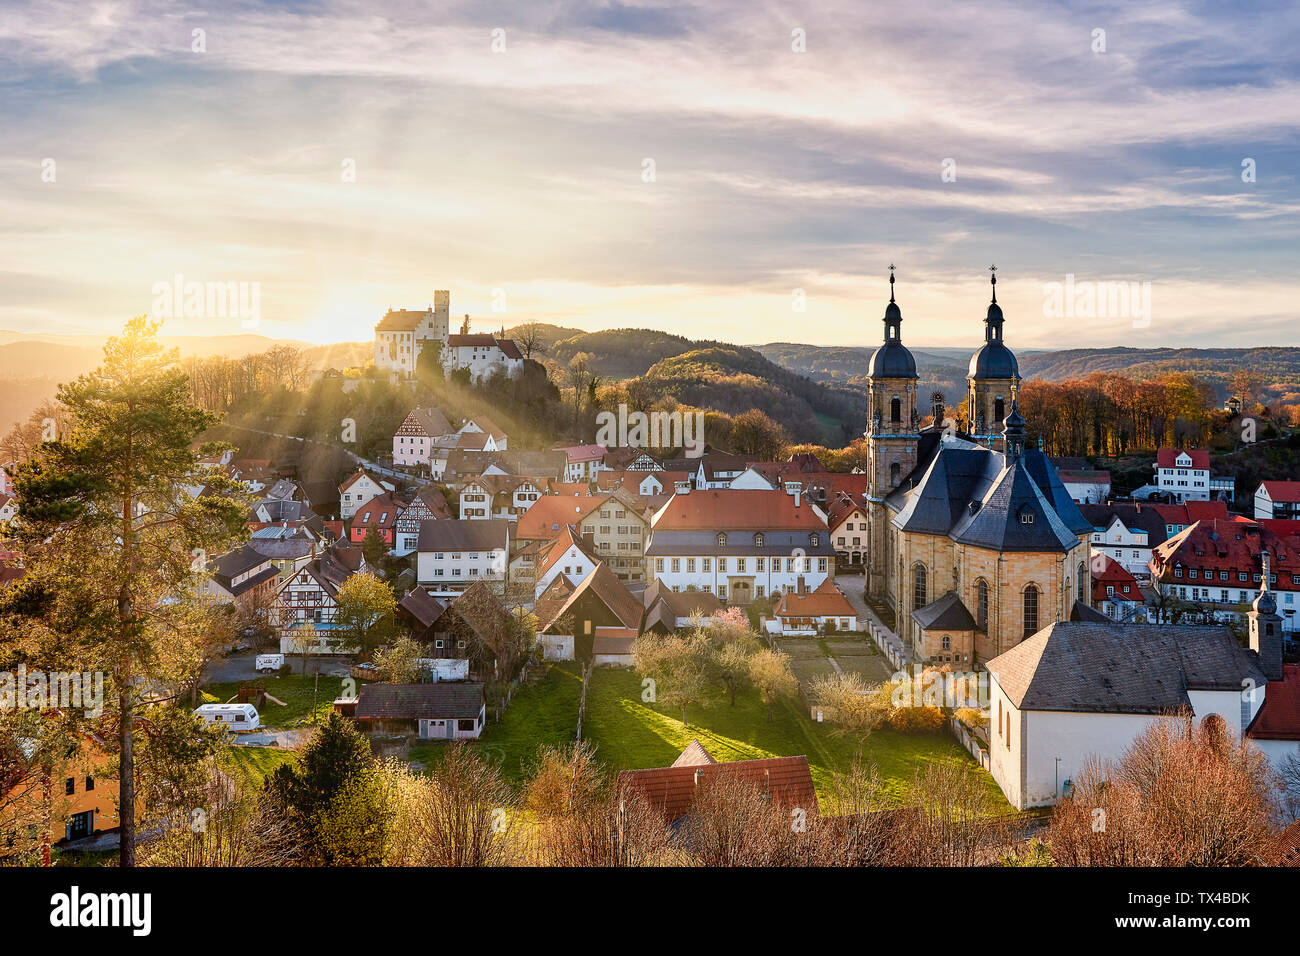 Germany, Bavaria, Goessweinstein, view over basilica and castle Stock Photo